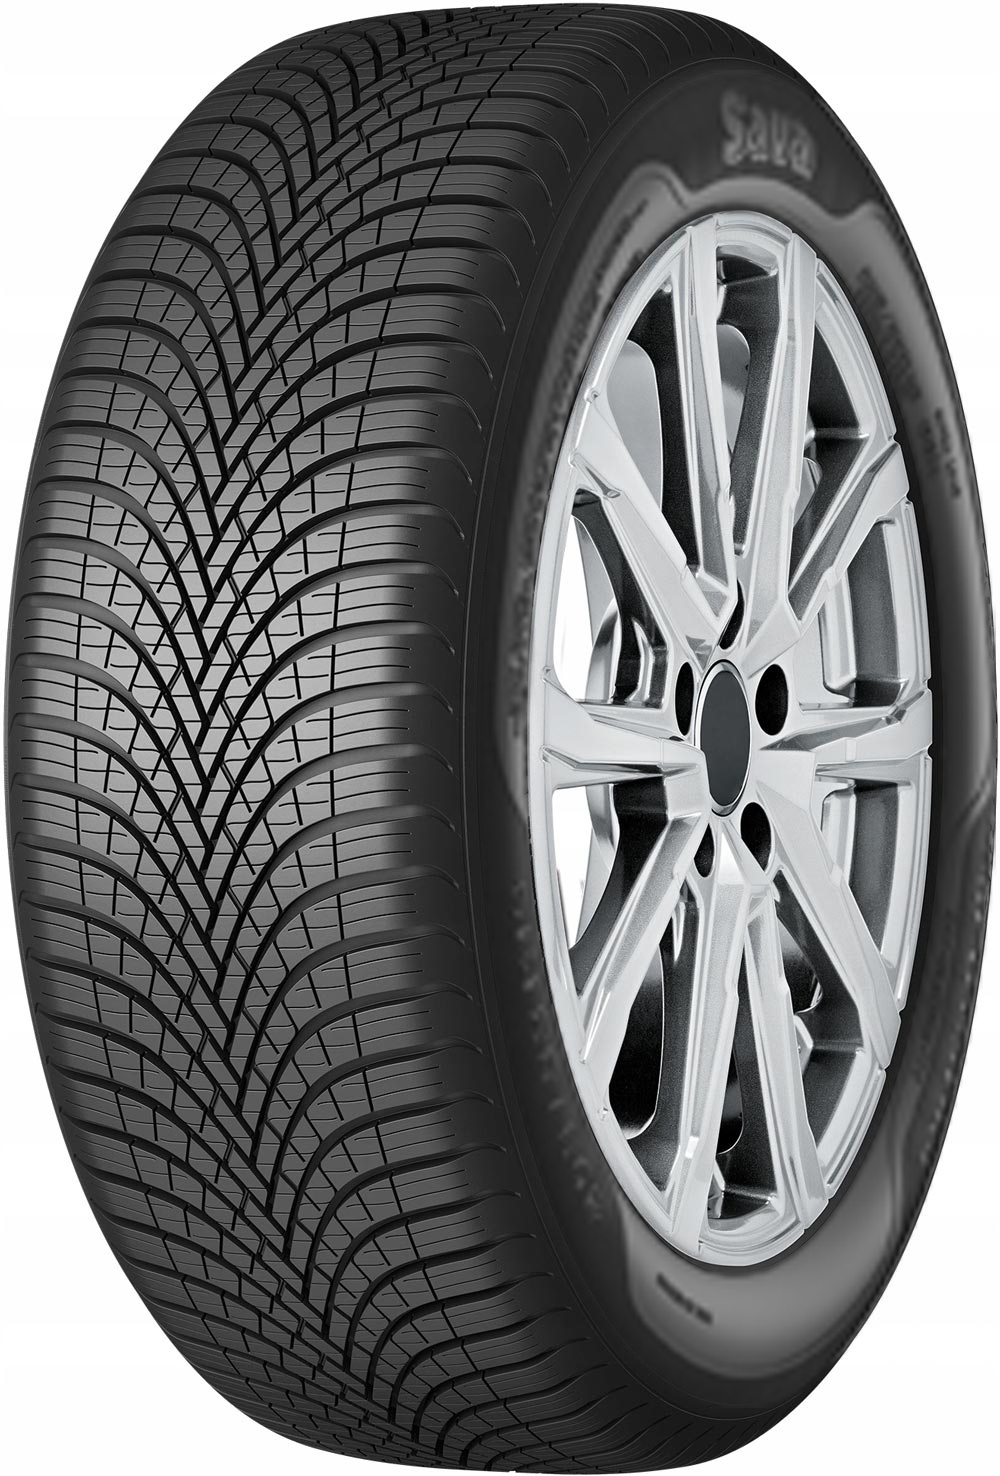 Anvelope auto SAVA ALL WEATHER XL 215/55 R17 98V